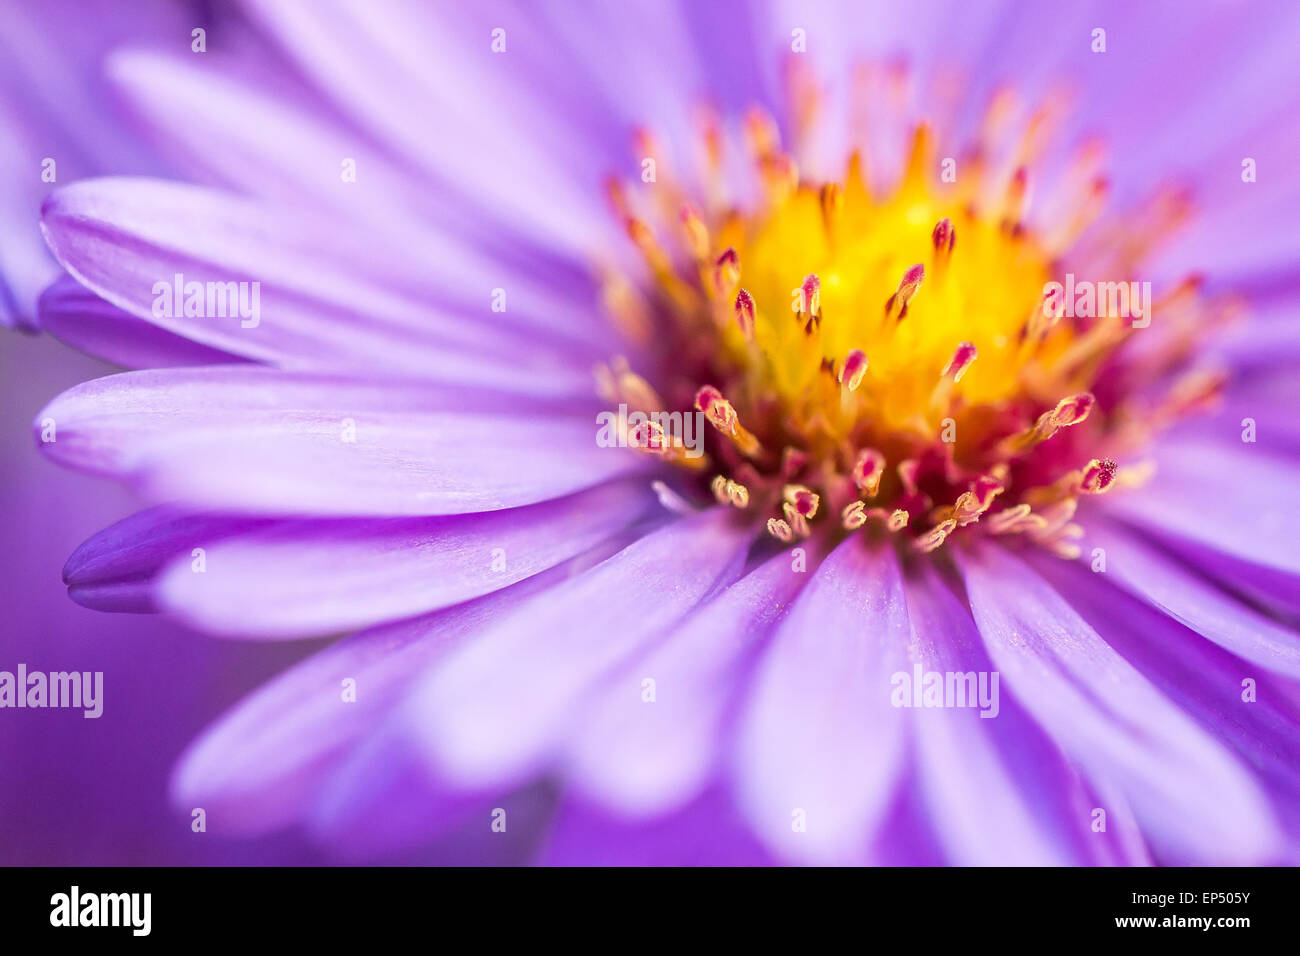 closeup violet aster flower background Stock Photo